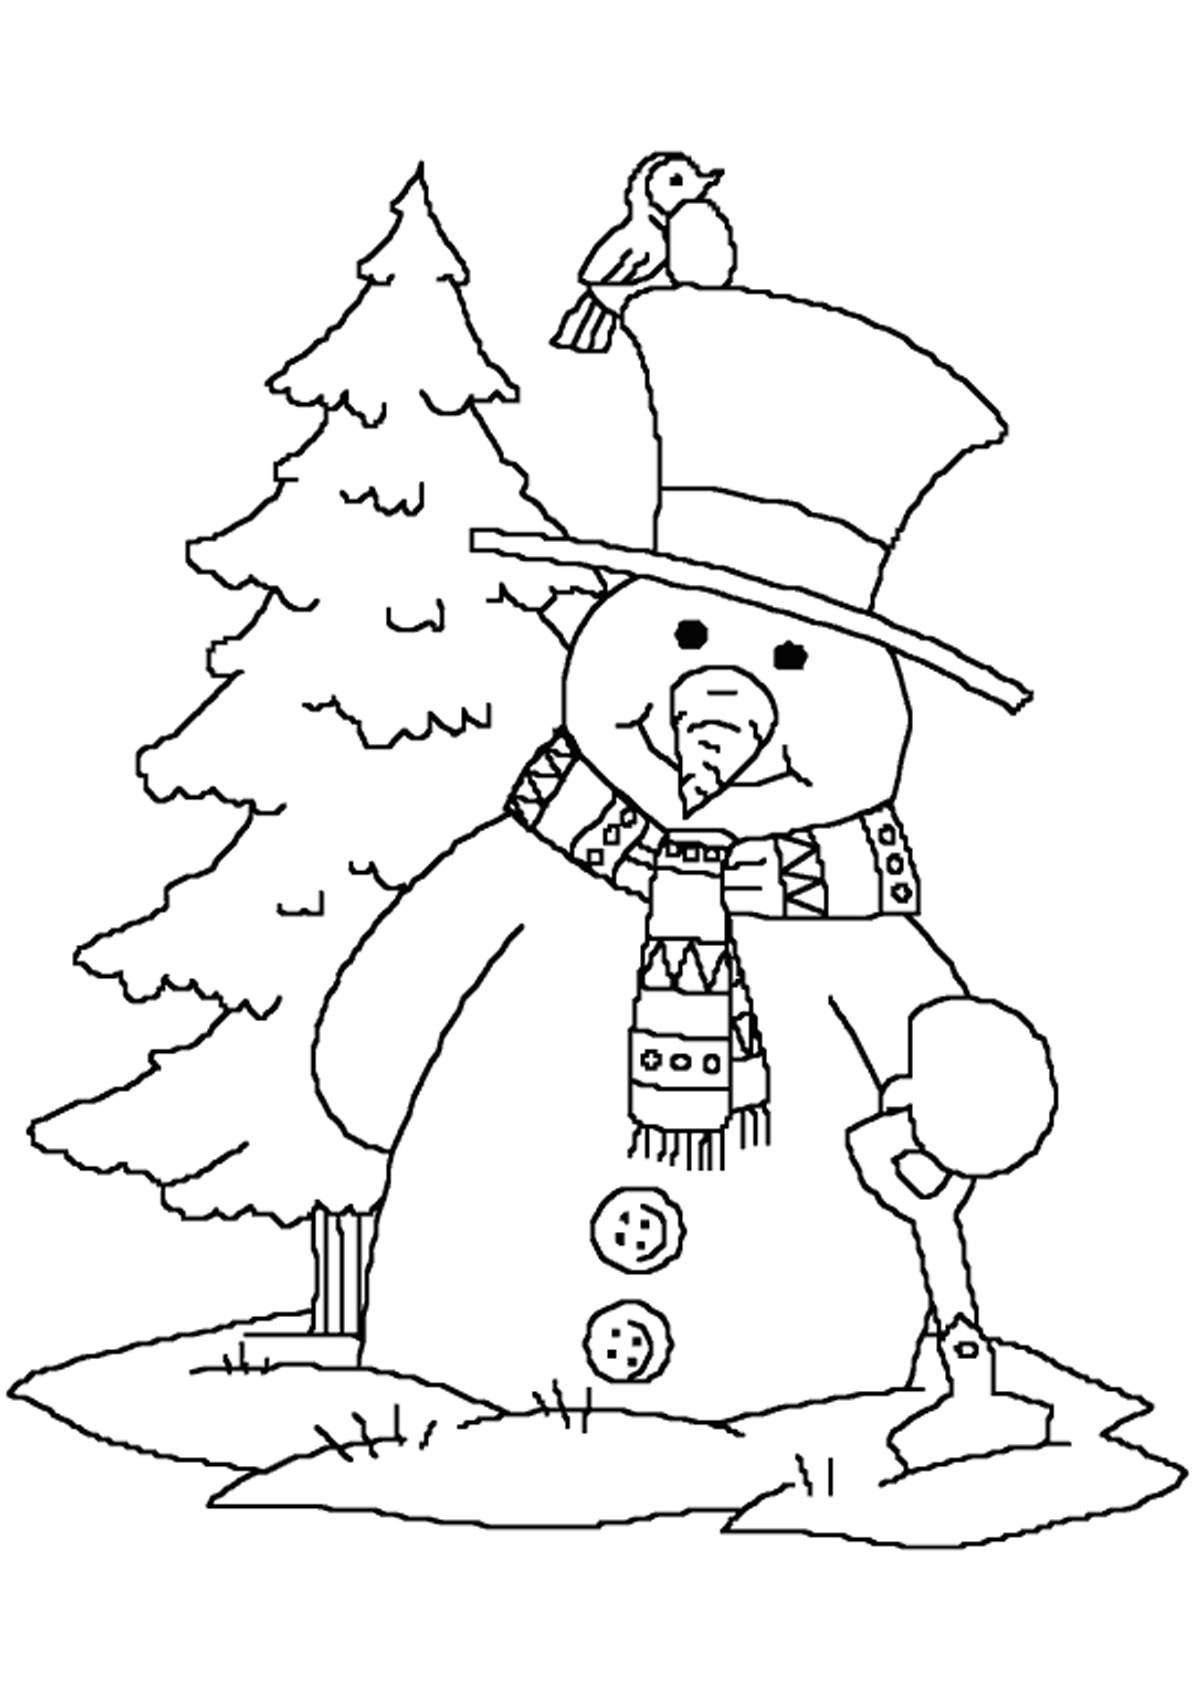 Great winter coloring card